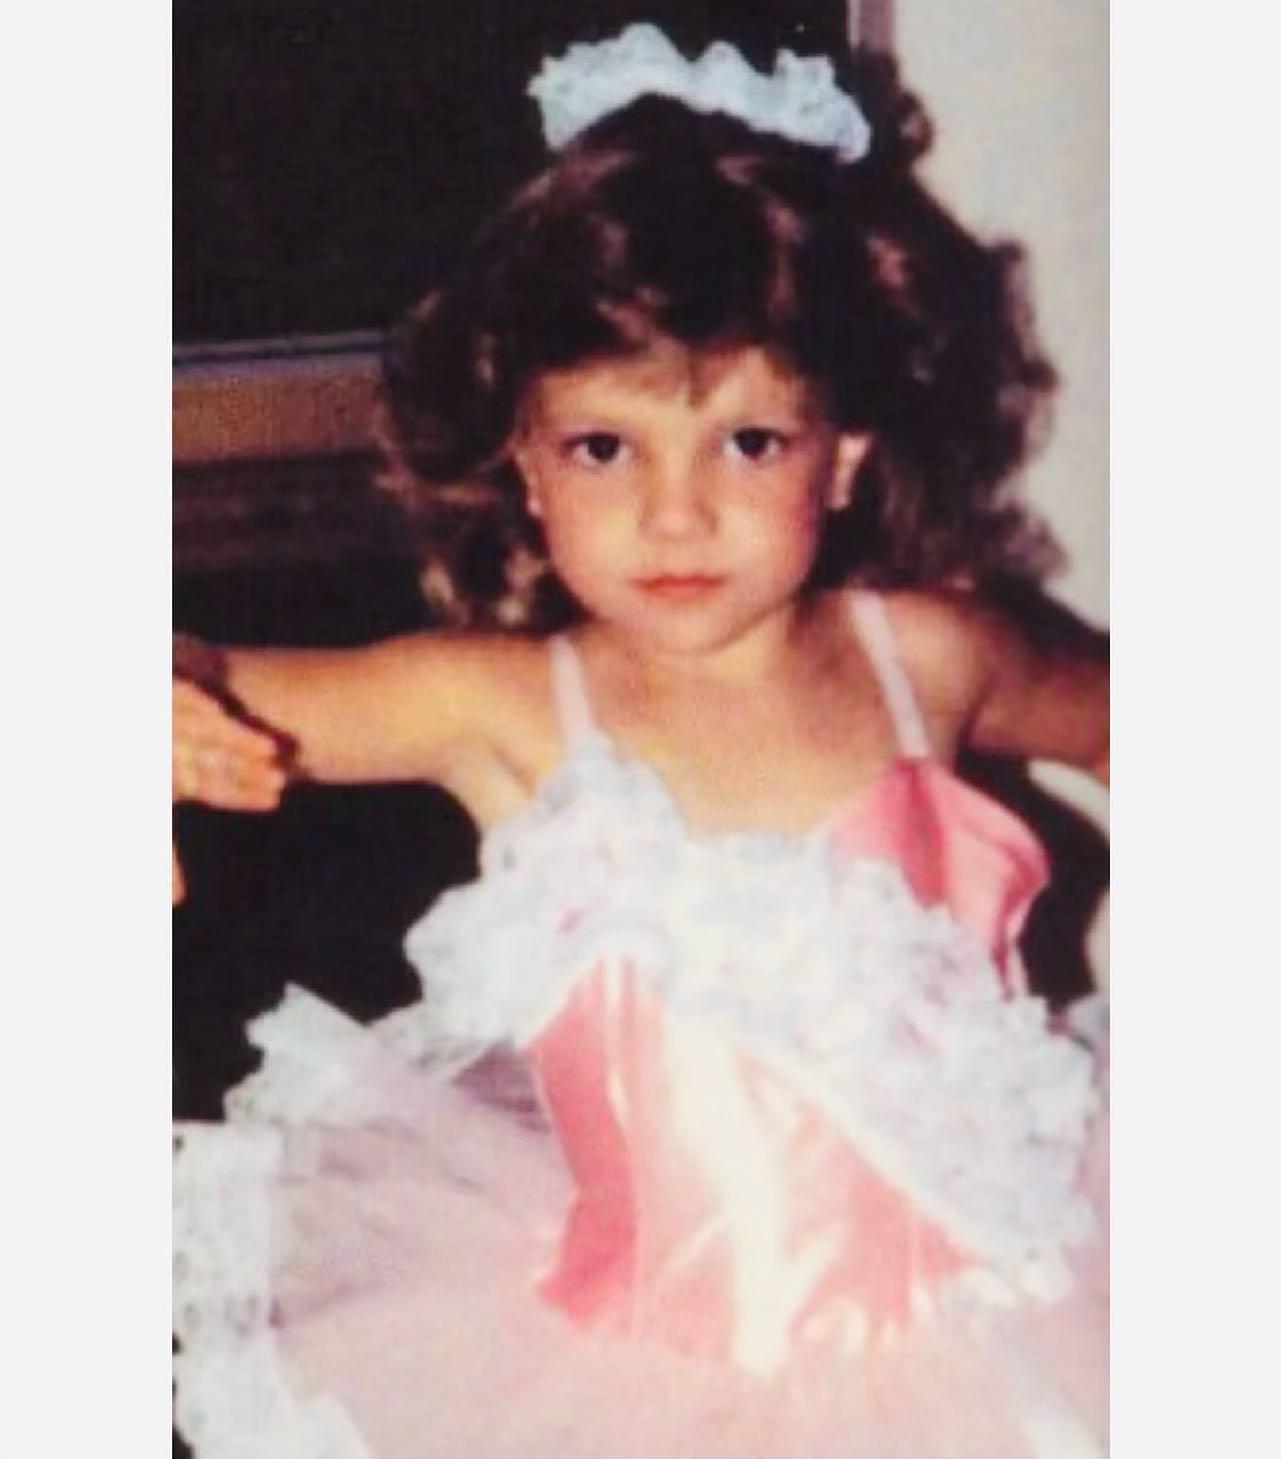 Britney Spears shares childhood photo